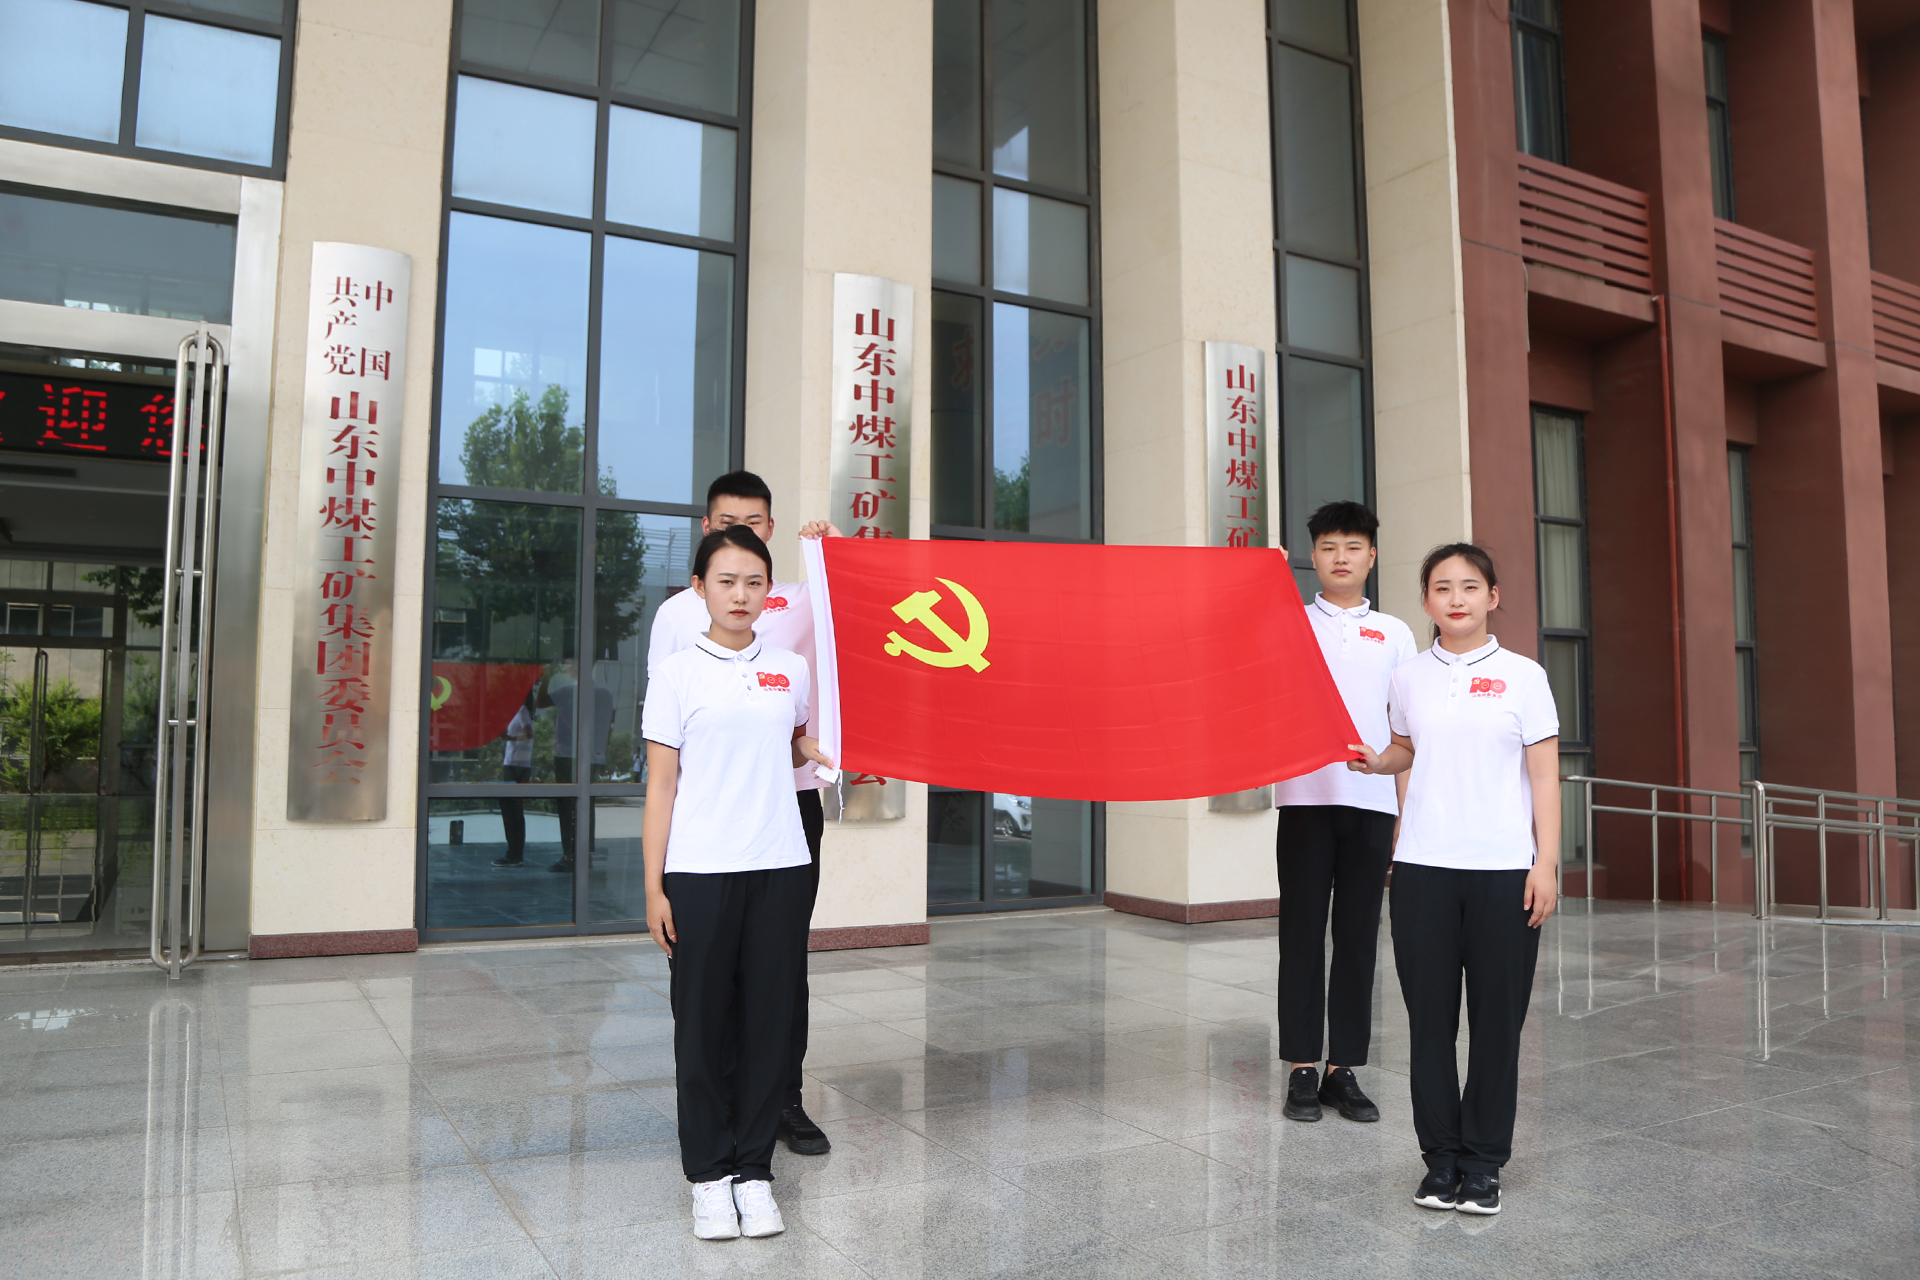 The Party Committee Of China Coal Group Launched A Series Of Activities To Celebrate The 100th Anniversary Of The Founding Of The Communist Party Of China